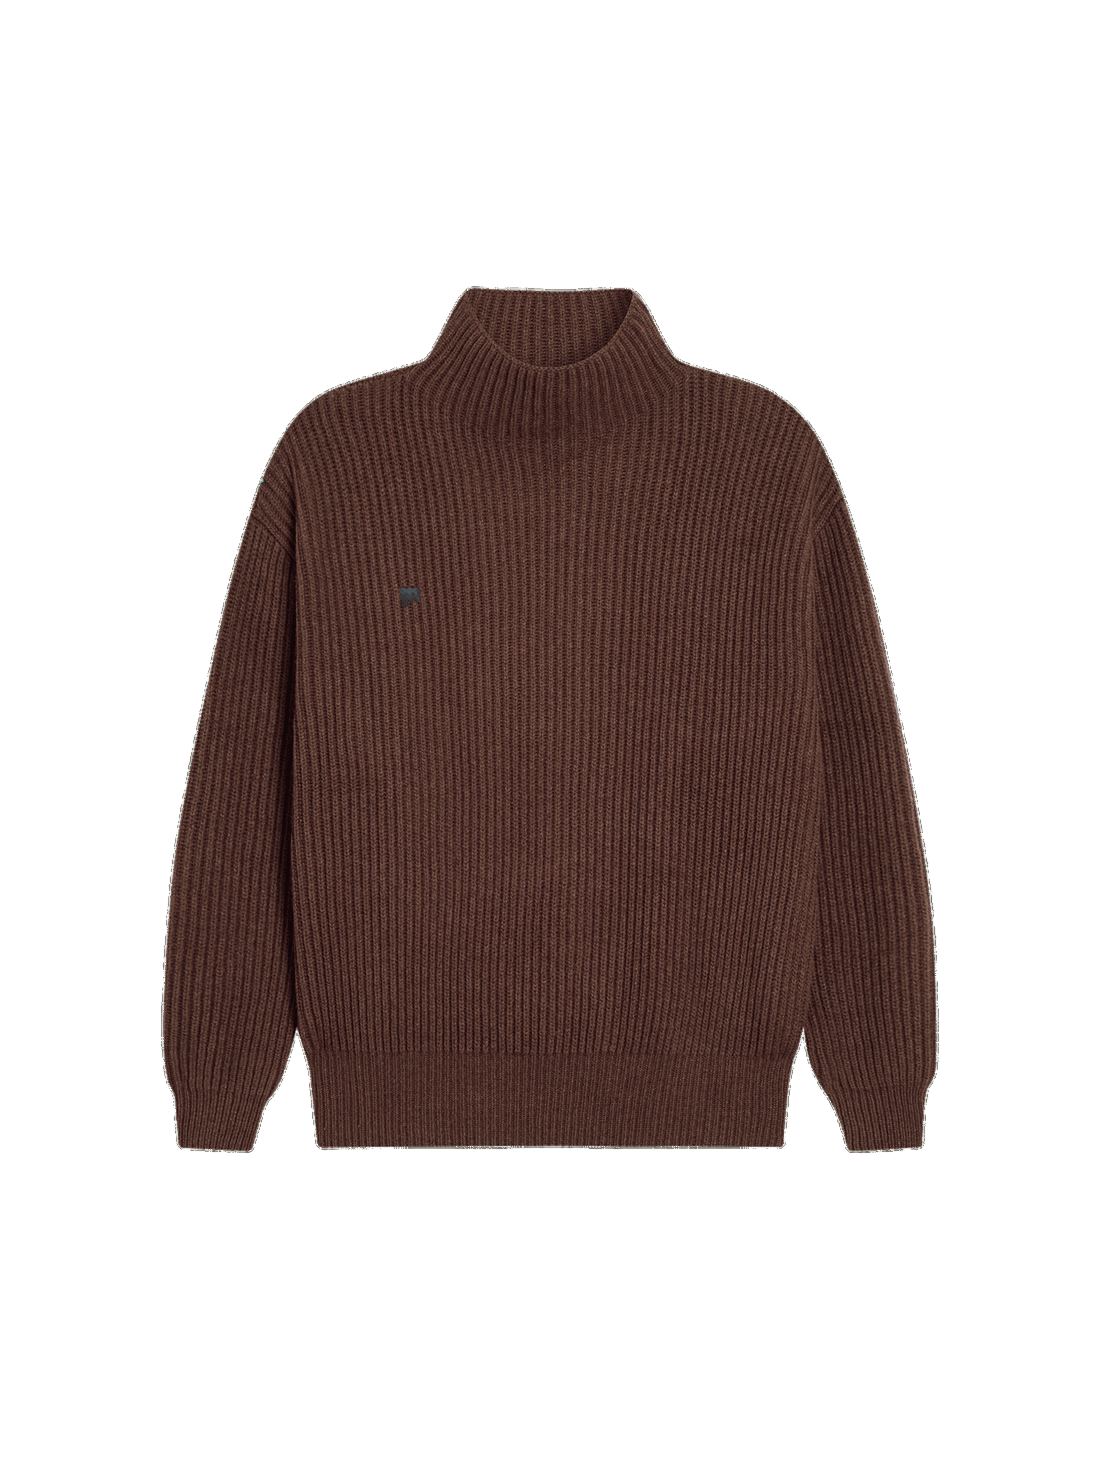 https://storage.googleapis.com/download/storage/v1/b/whering.appspot.com/o/marketplace_product_images%2Fpangaia-recycled-cashmere-funnelneck-sweater-brown-ktAeiTF6QacgqPBd8G4rv2.png?generation=1679395319531784&alt=media